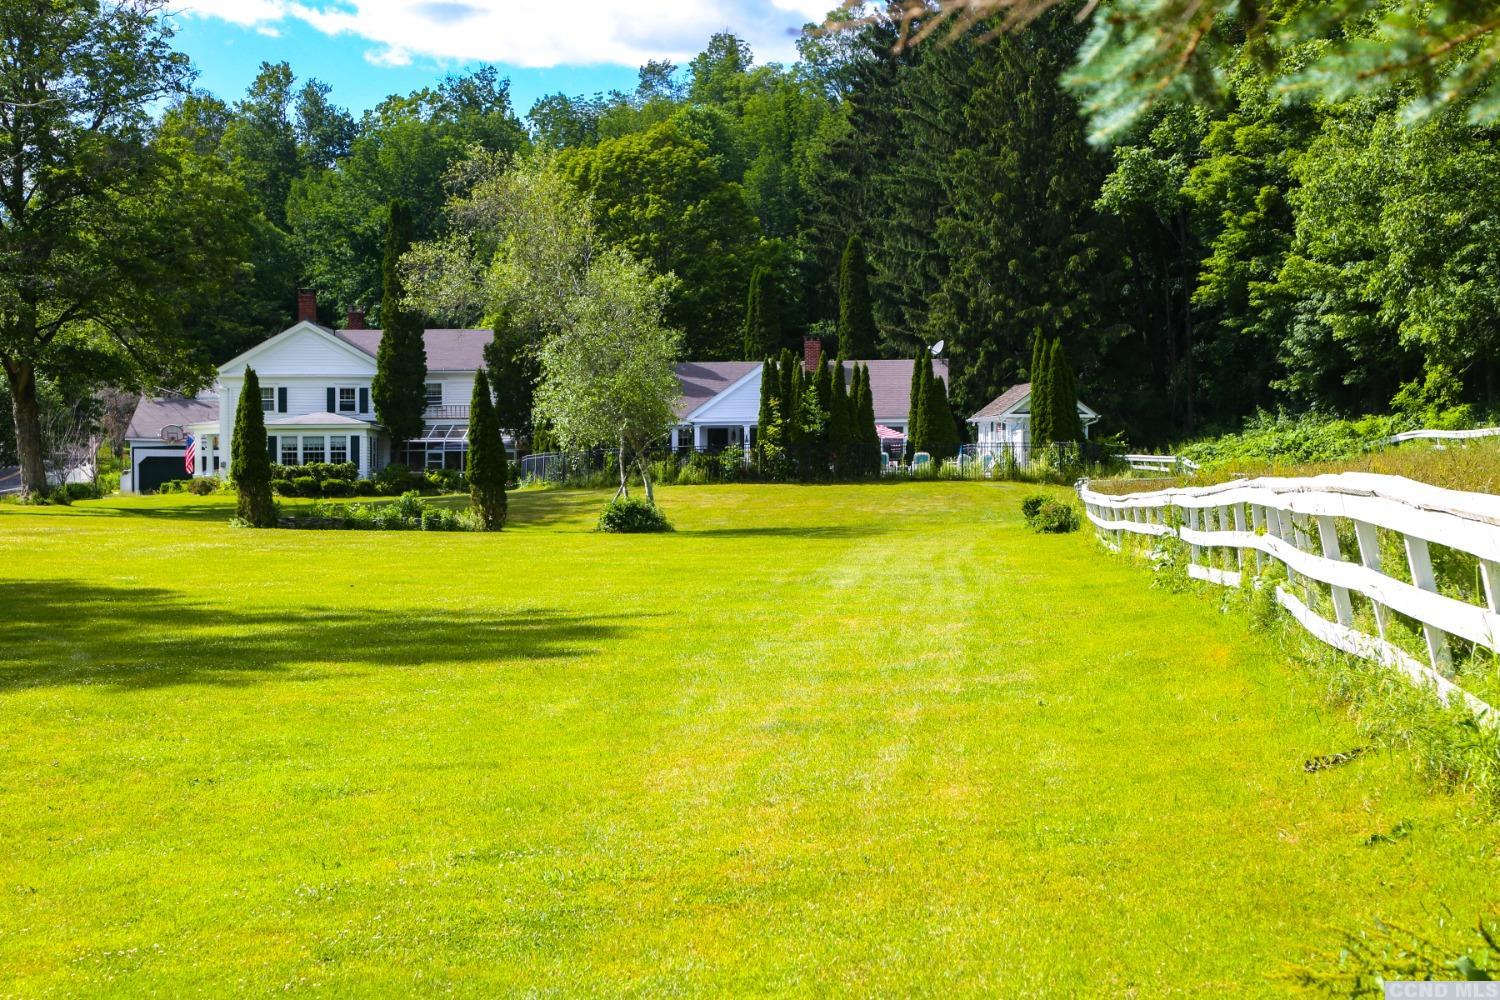 Property for Sale at 45694577 Route 199, Millerton, New York - Bedrooms: 4 
Bathrooms: 6 
Rooms: 11  - $1,765,000